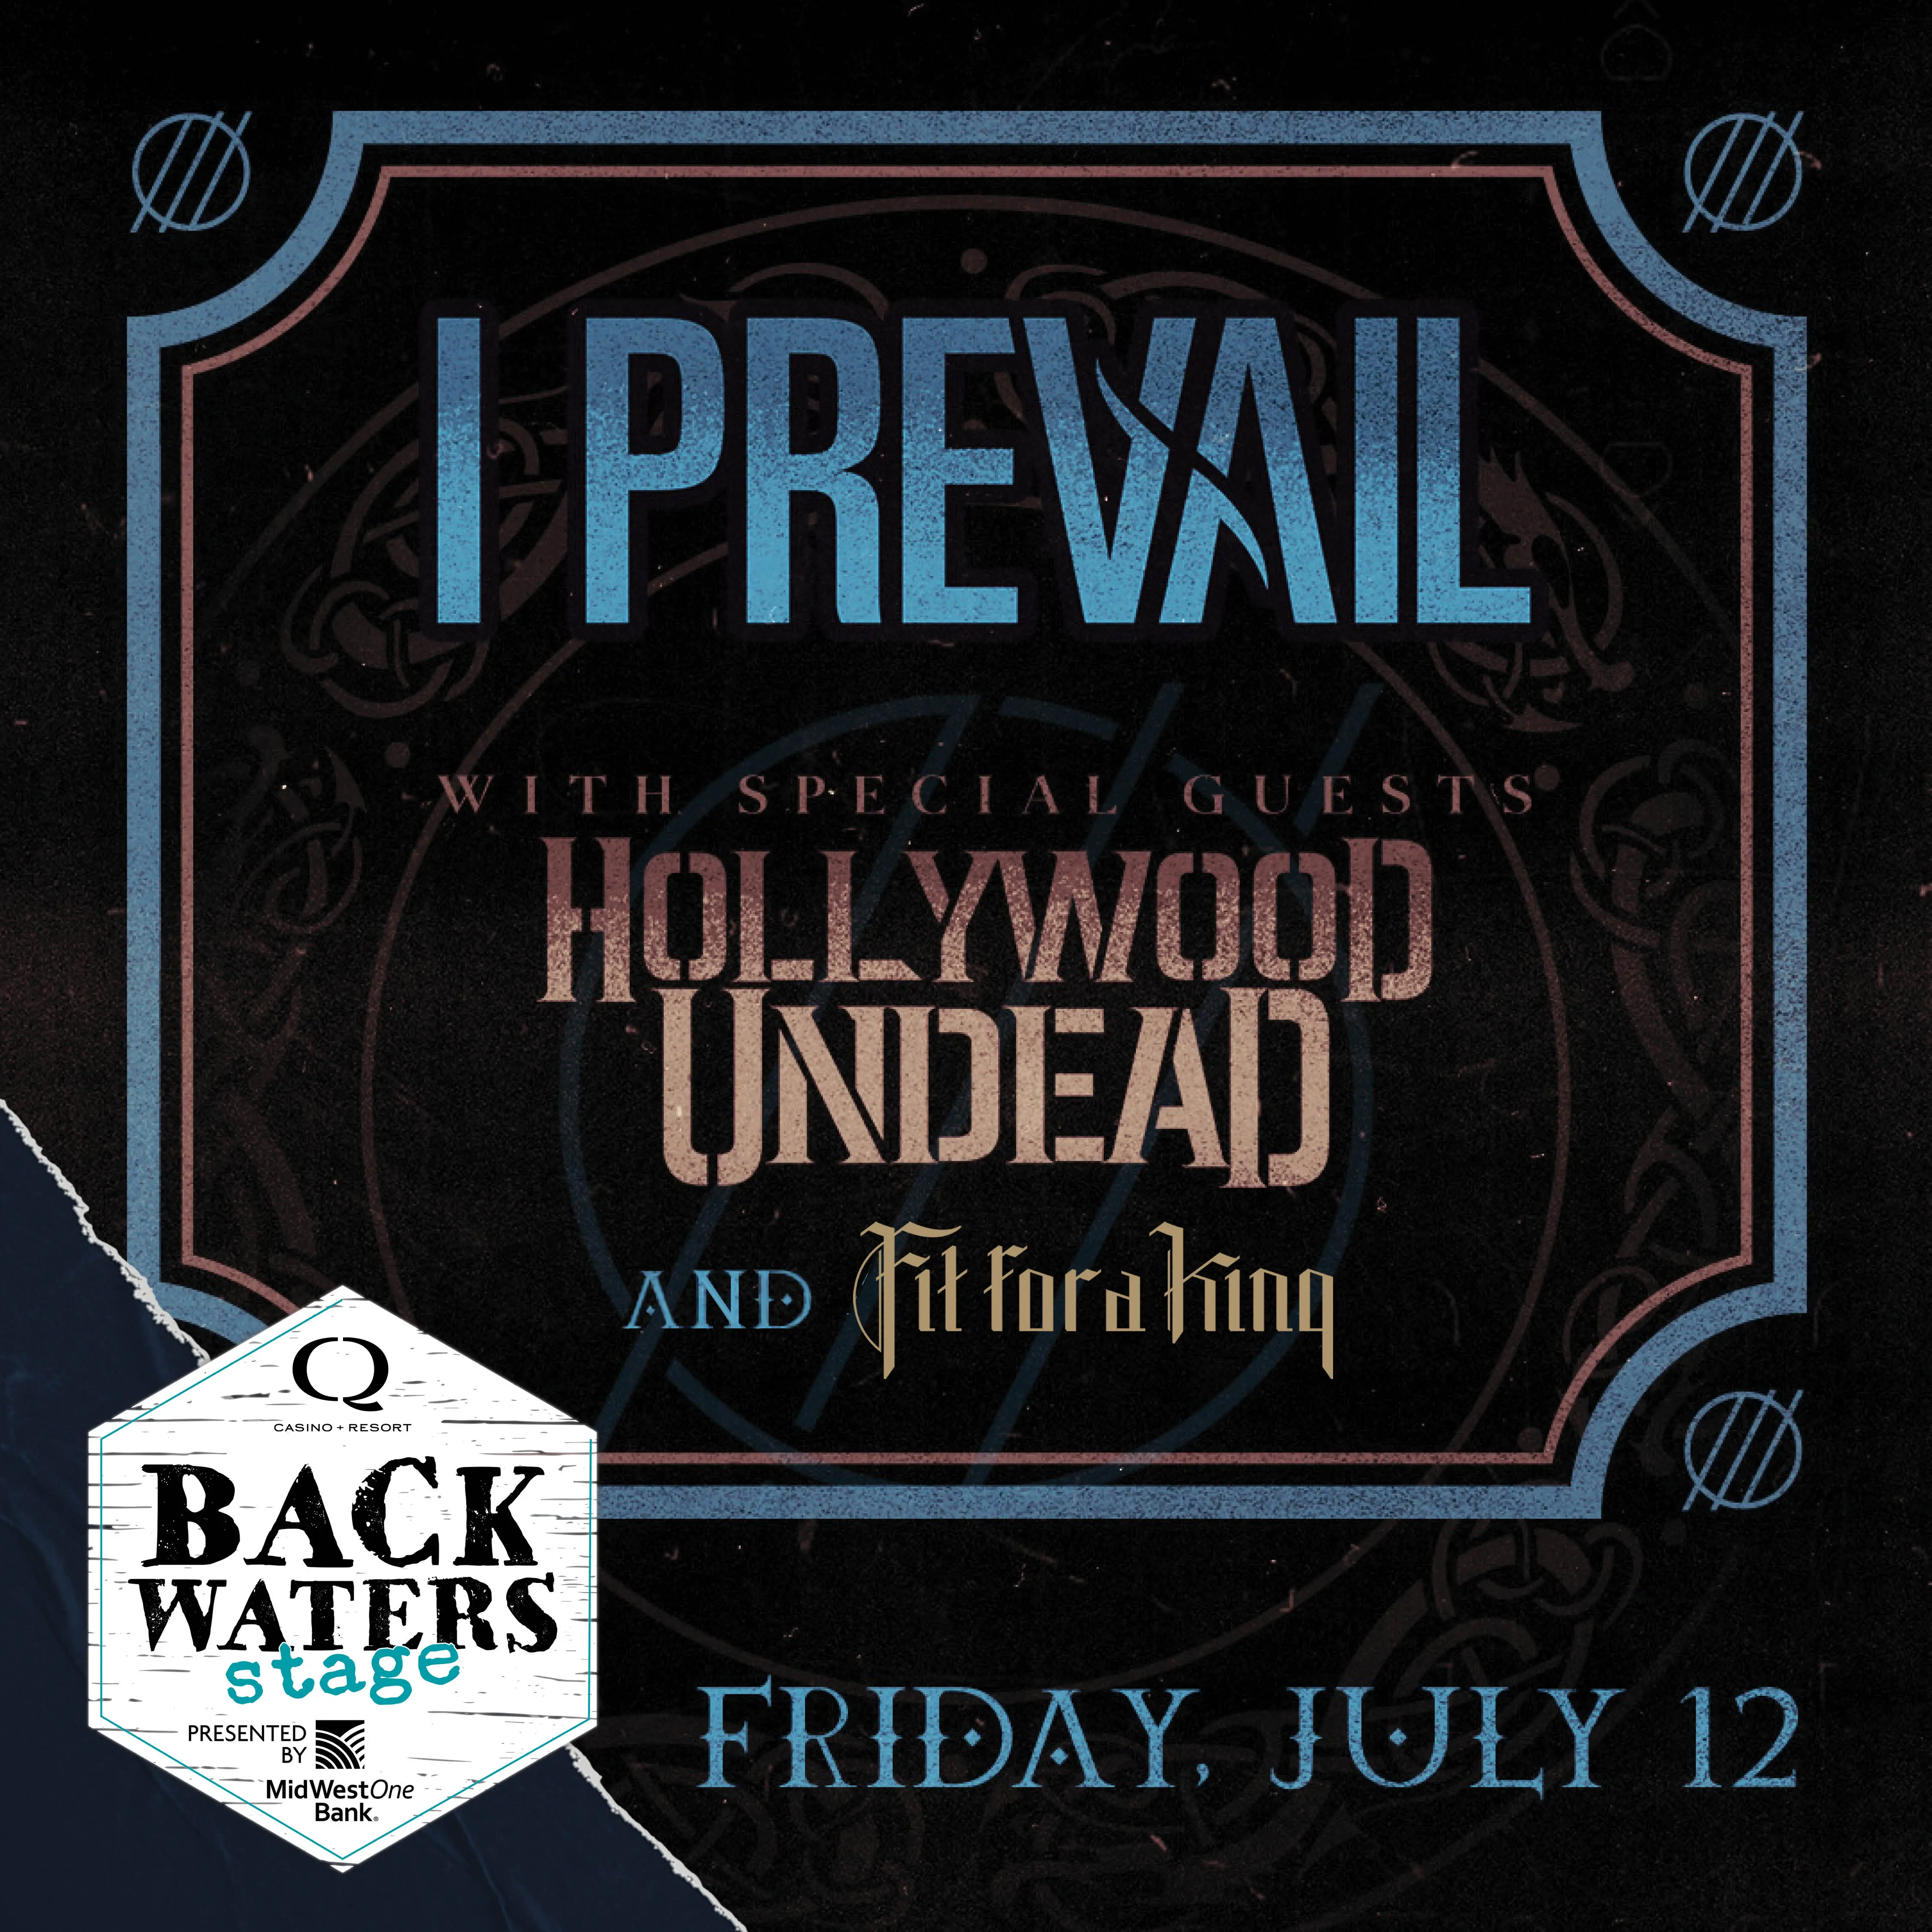 I Prevail with special guests Hollywood Undead and Fit for a King